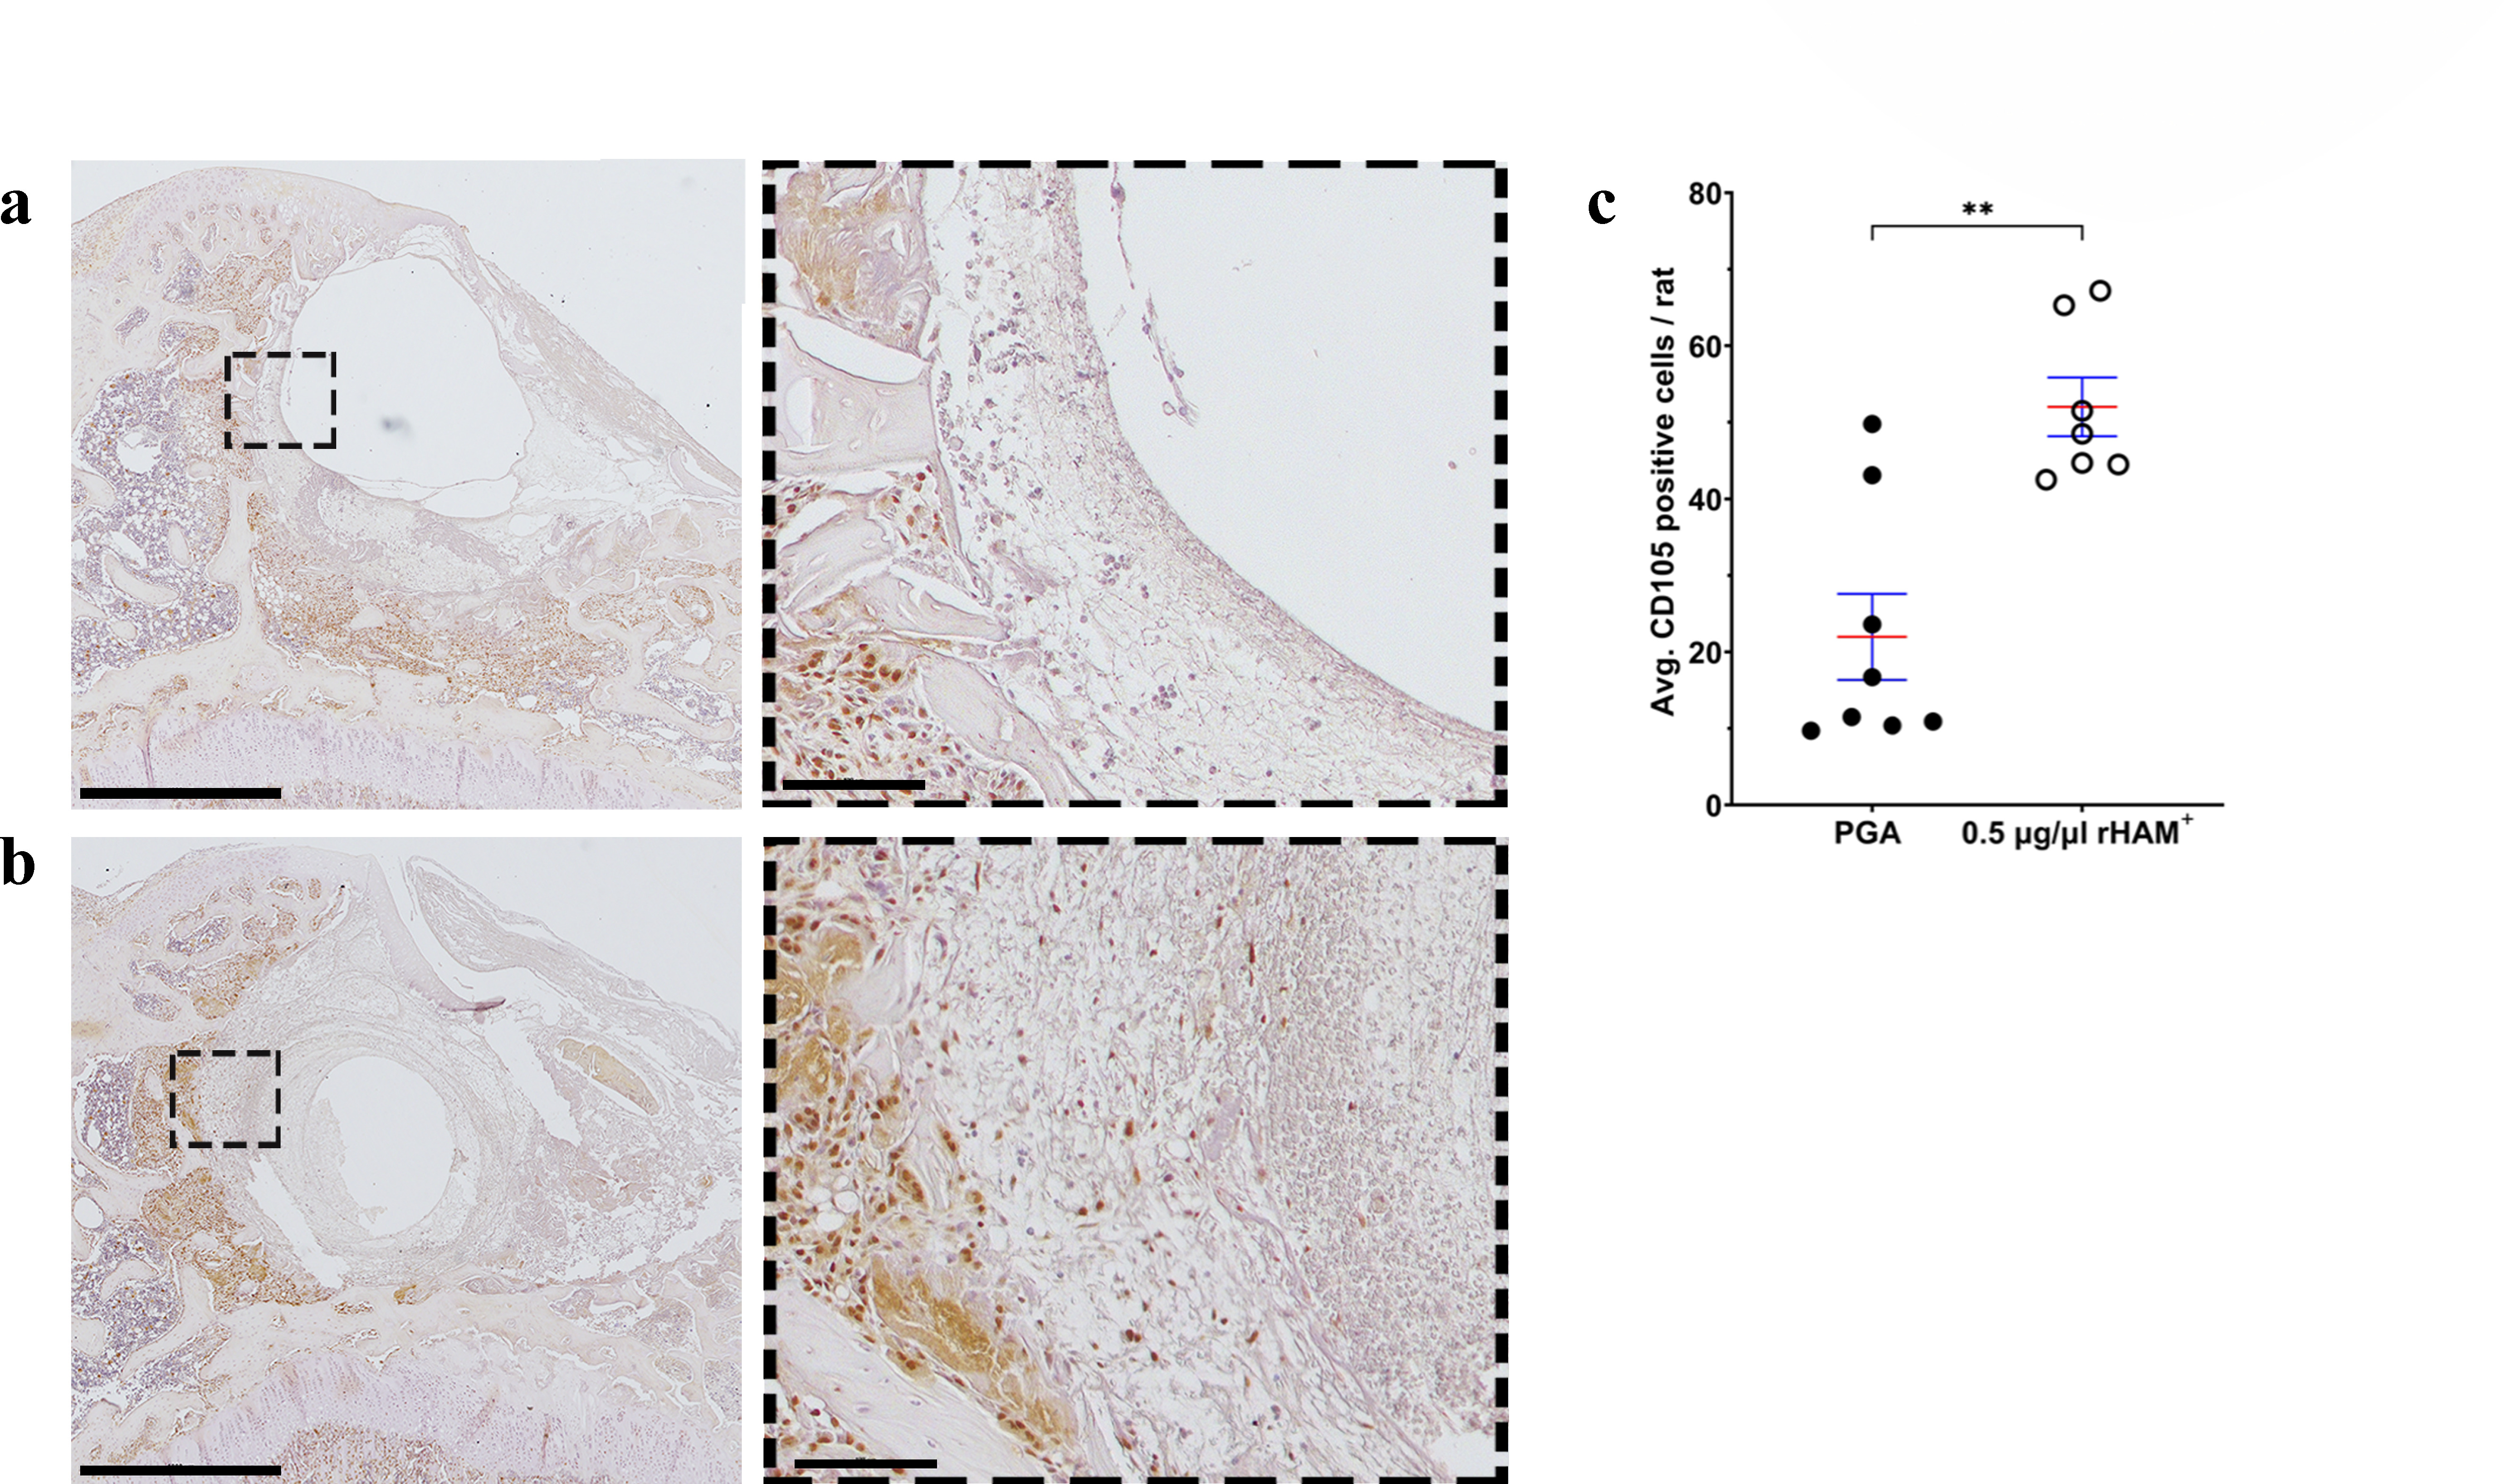 Fig. 4 
            Histological analysis of the granulation tissue at the osteochondral injury (OCI) four days after treatment. Immunohistochemistry for CD105 expression after treatment with a) propylene glycol alginate (PGA) alone (n = 8) and b) 0.5 μg/μl recombinant human amelogenin protein (rHAM+) (n = 7). Scale bar: 1,000 μm. Enlarged pictures (×20) were taken from the regions marked with black frames, scale bar: 100 μm. Brown staining: CD105 positive cells; purple staining (haematoxylin and eosin (H&E)): CD105 negative cells. c) Average number of cells in the granulation tissue and surrounding of the OCI. Data presented as mean (standard error of the mean). **p < 0.01, Mann-Whitney U test.
          